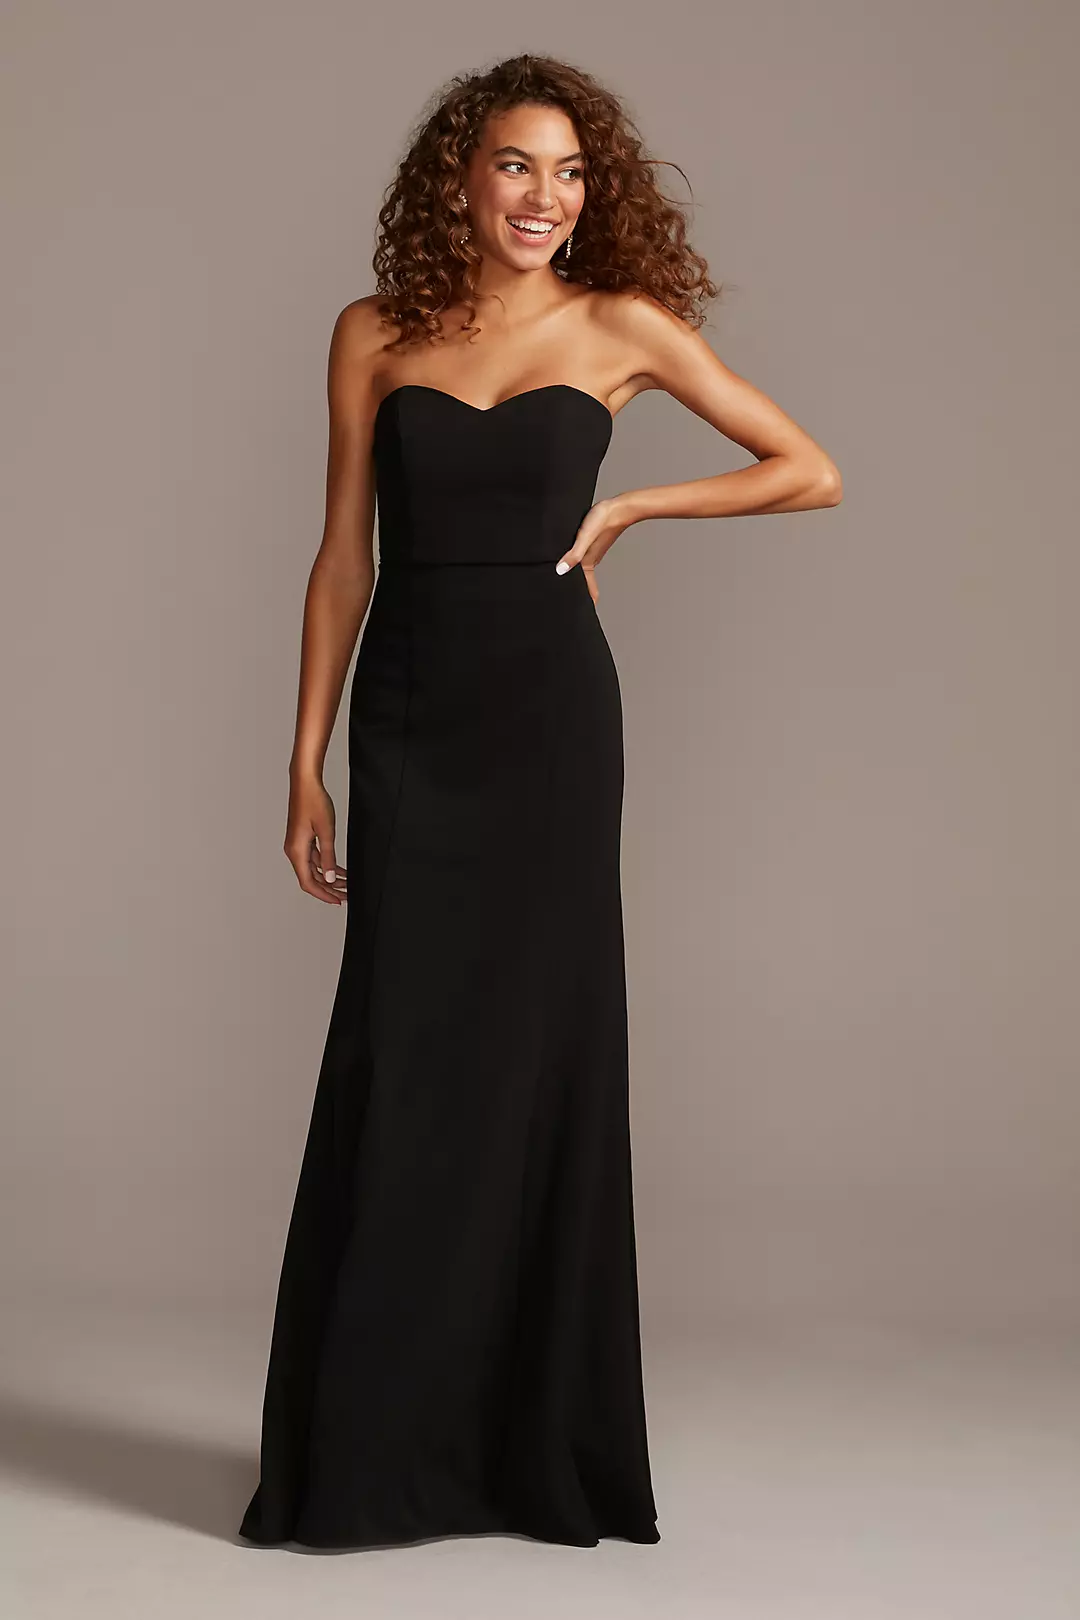 Sweetheart Strapless Stretch Crepe Dress